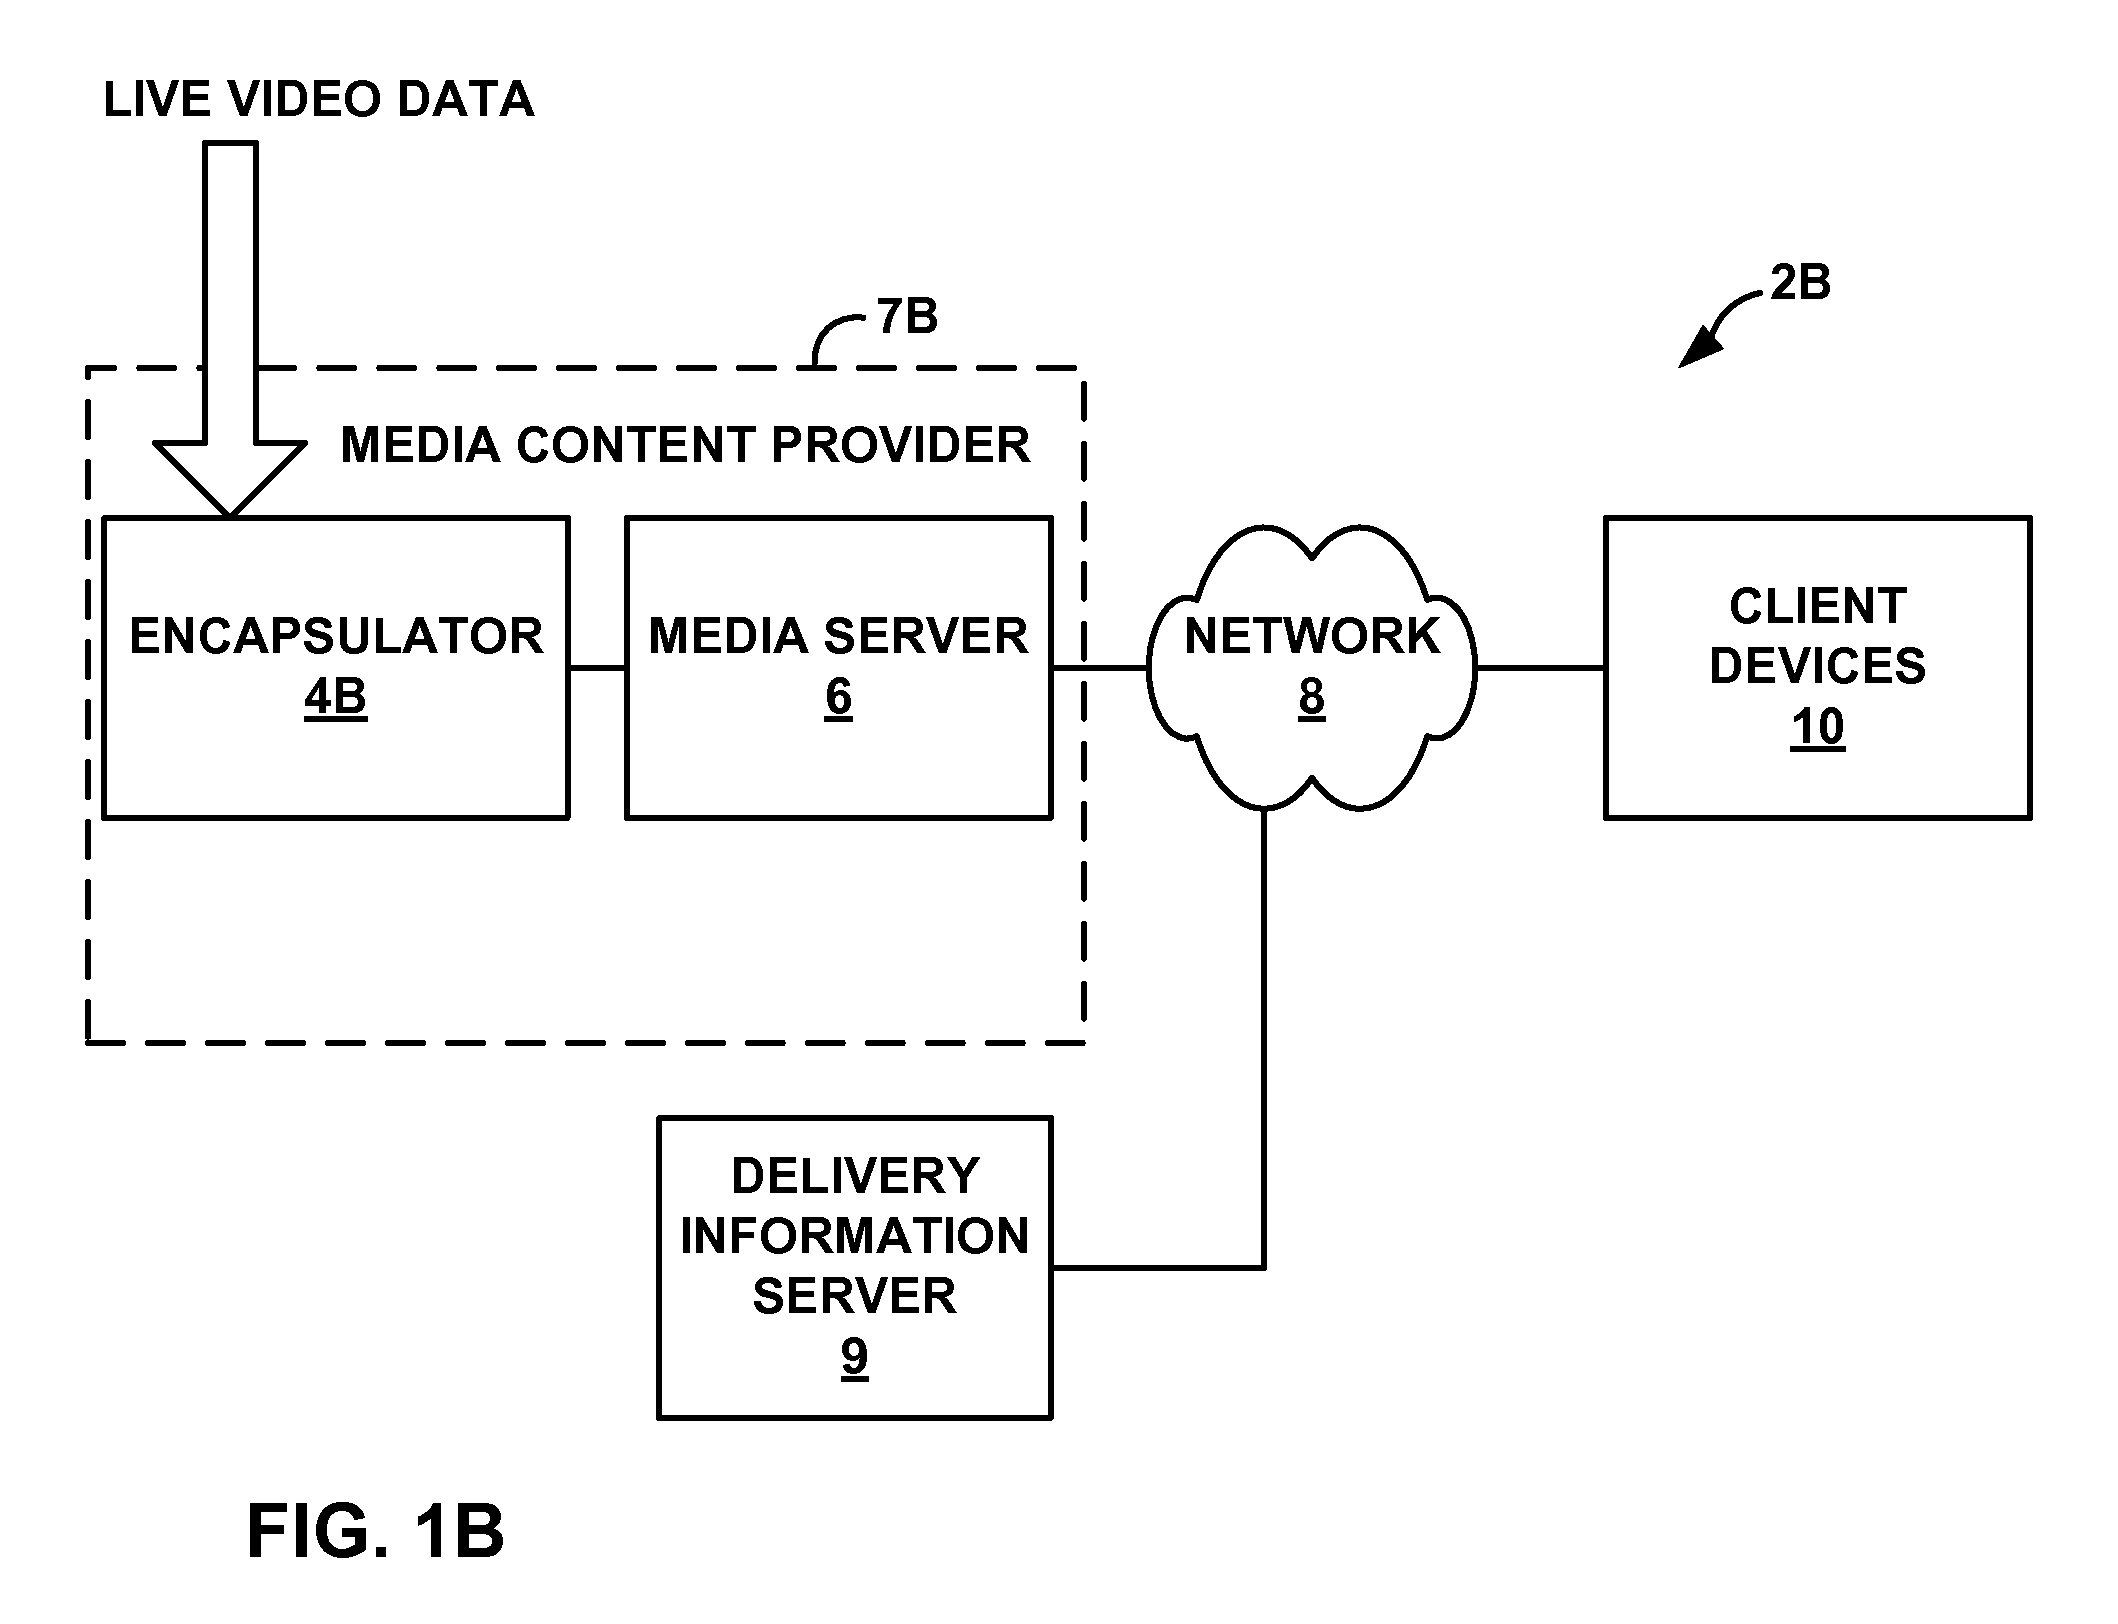 Live media delivery over a packet-based computer network